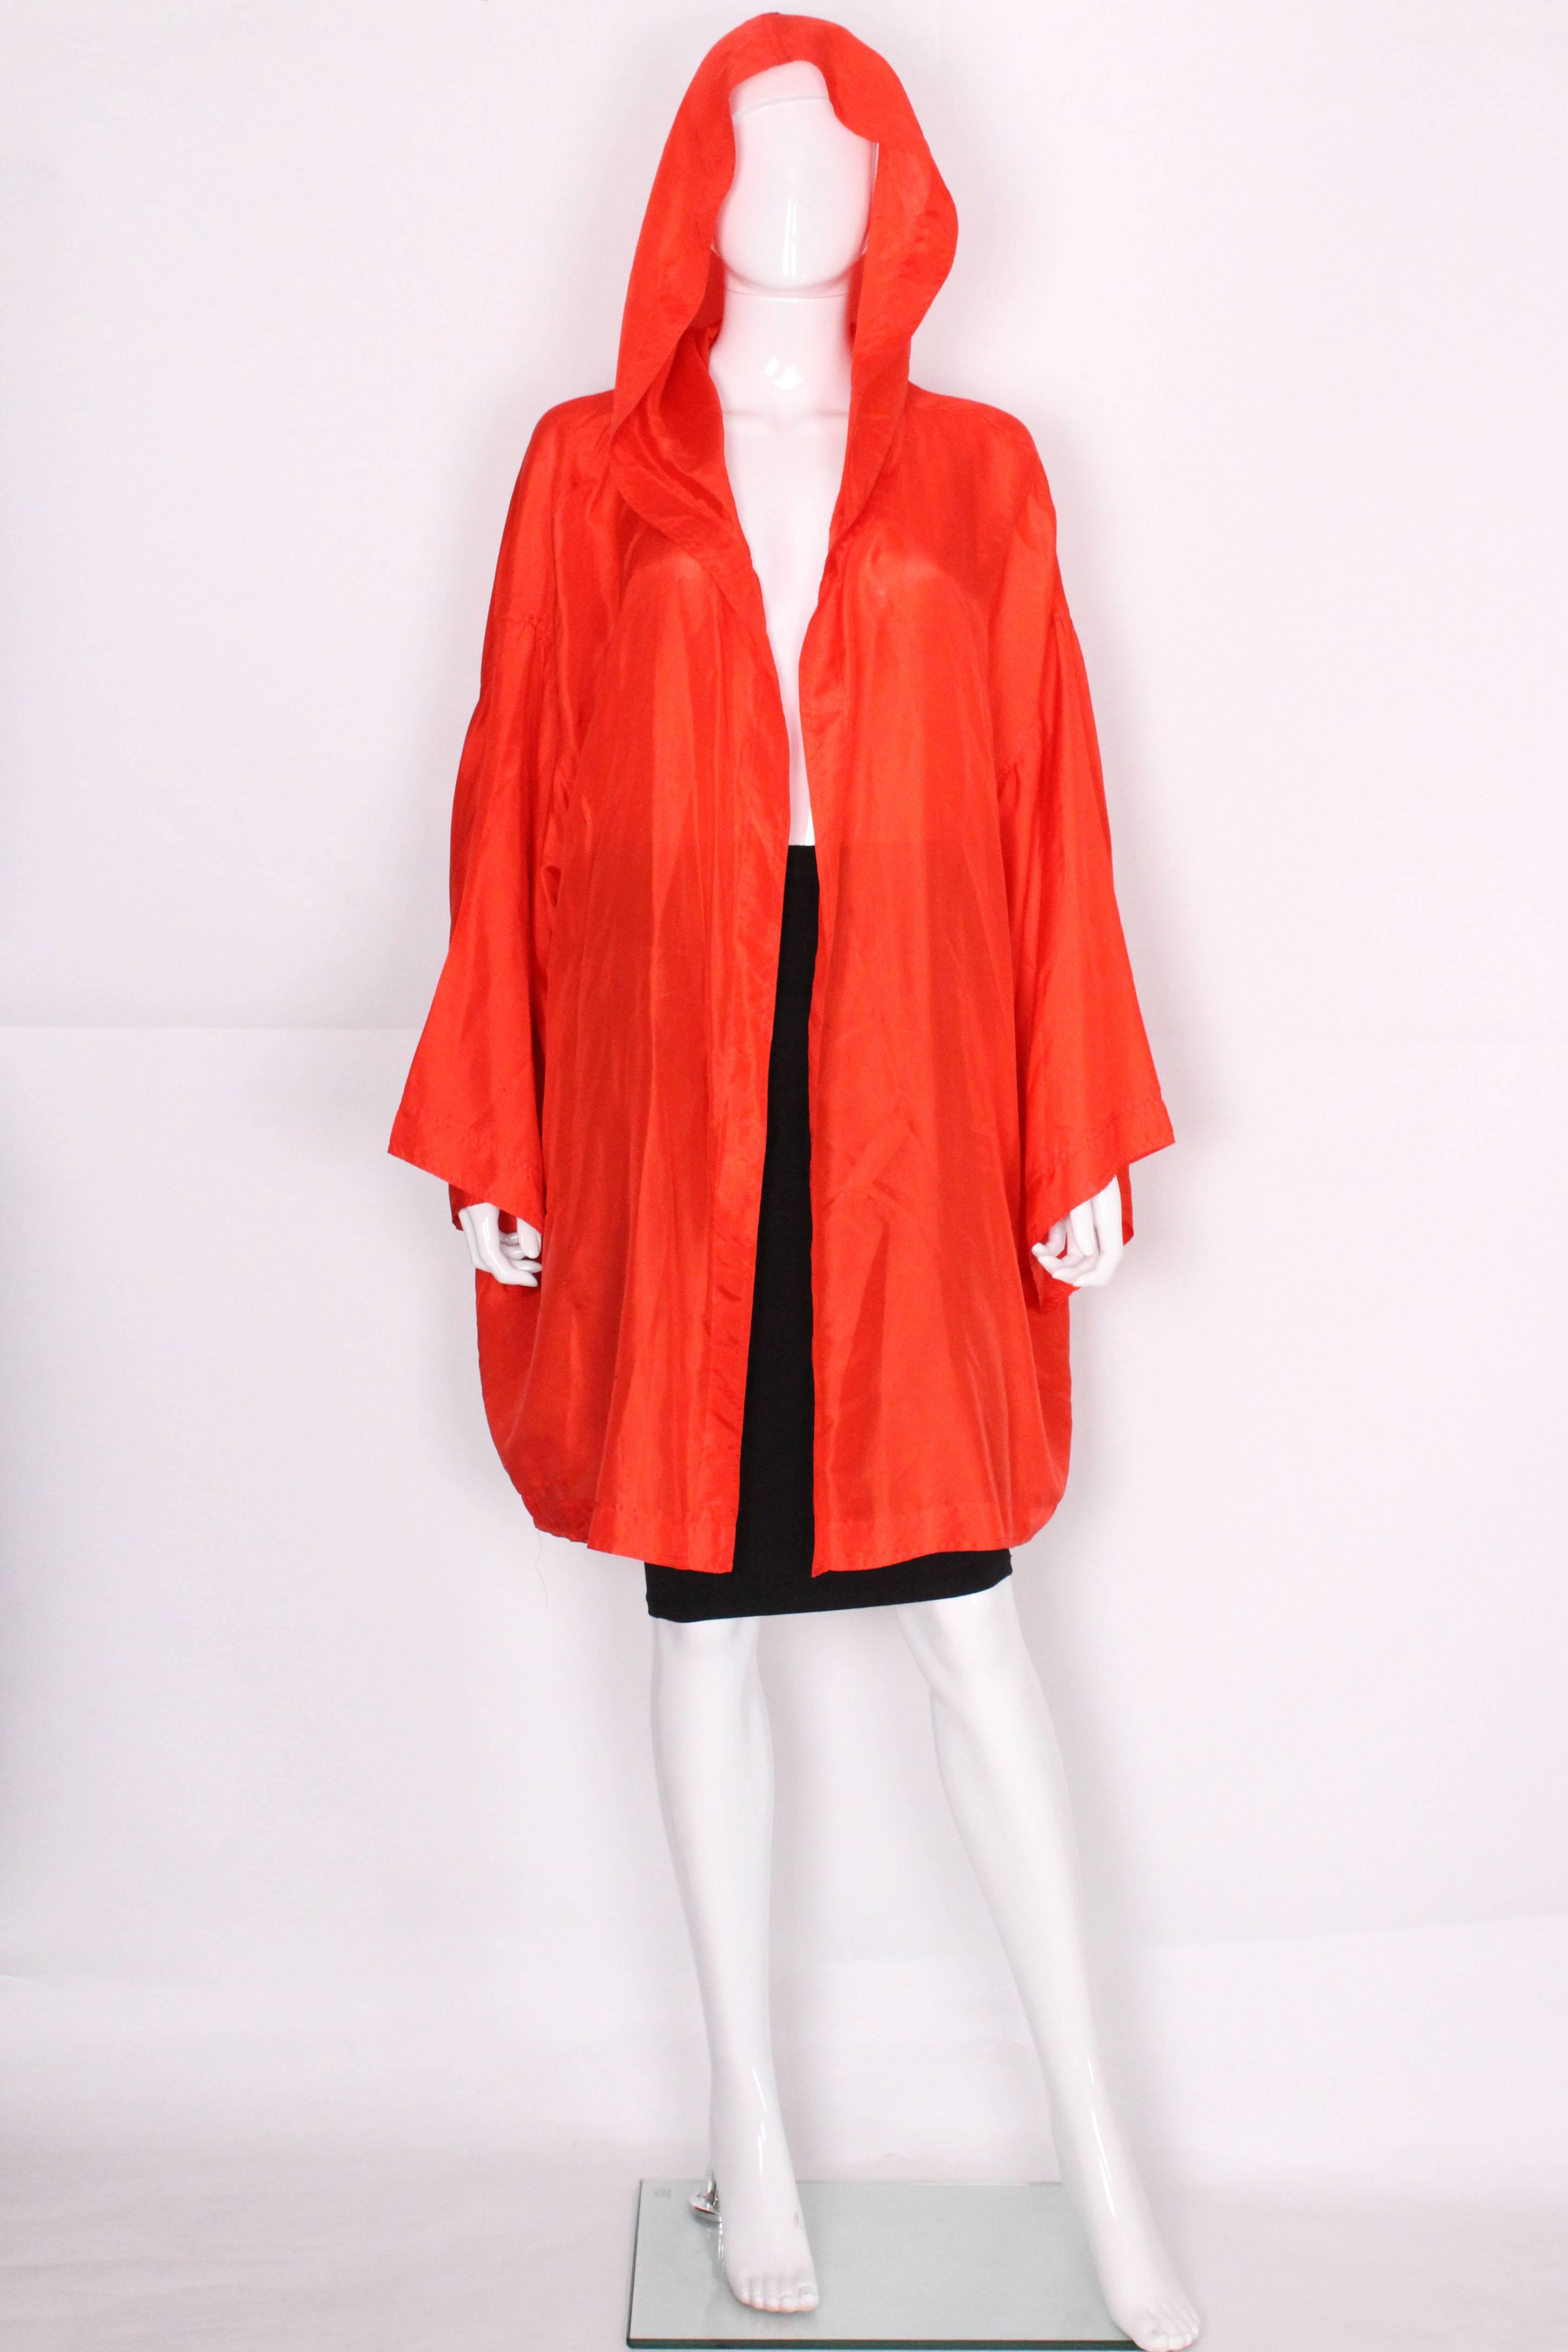 A great silk oversize jacket by Isacc Mizrahi. In a lovely tomato red silk, one size fits all etc, this jacket is great for wearing over sport or vacation wear. Will fit a bust size up to 52''.